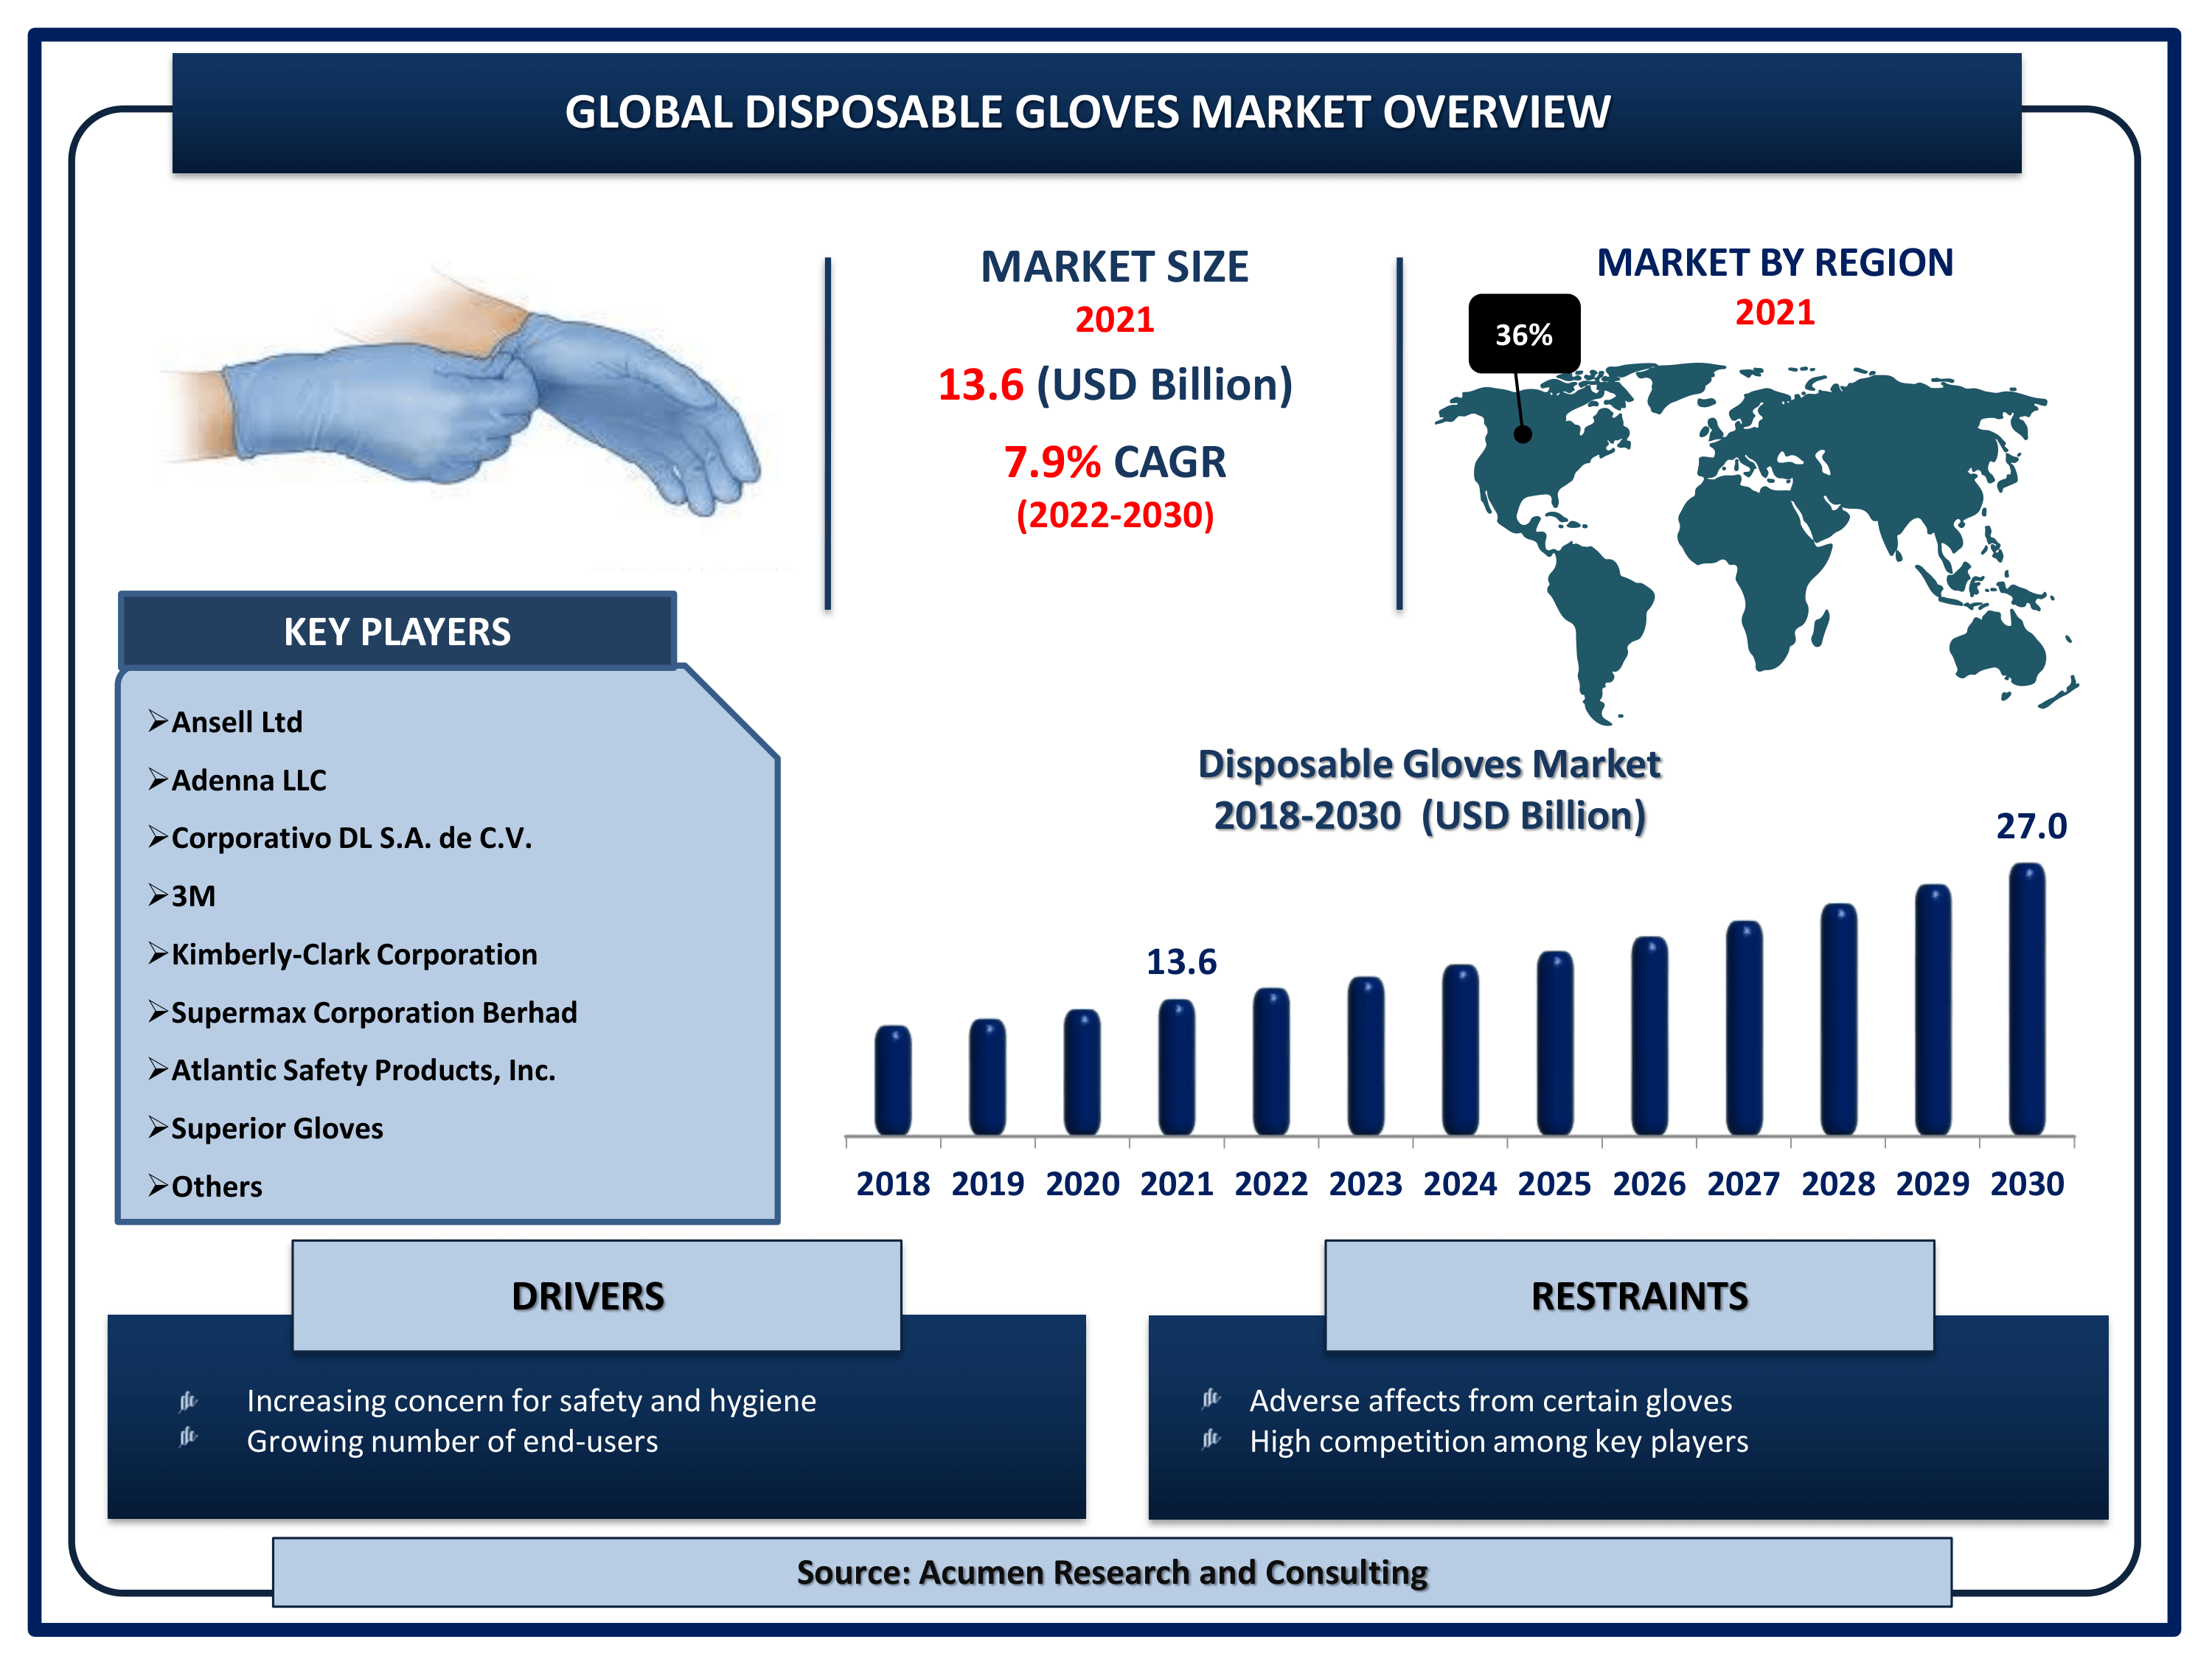 Global disposable gloves market revenue is estimated to reach USD 27 Billion by 2030 with a CAGR of 7.9% from 2022 to 2030